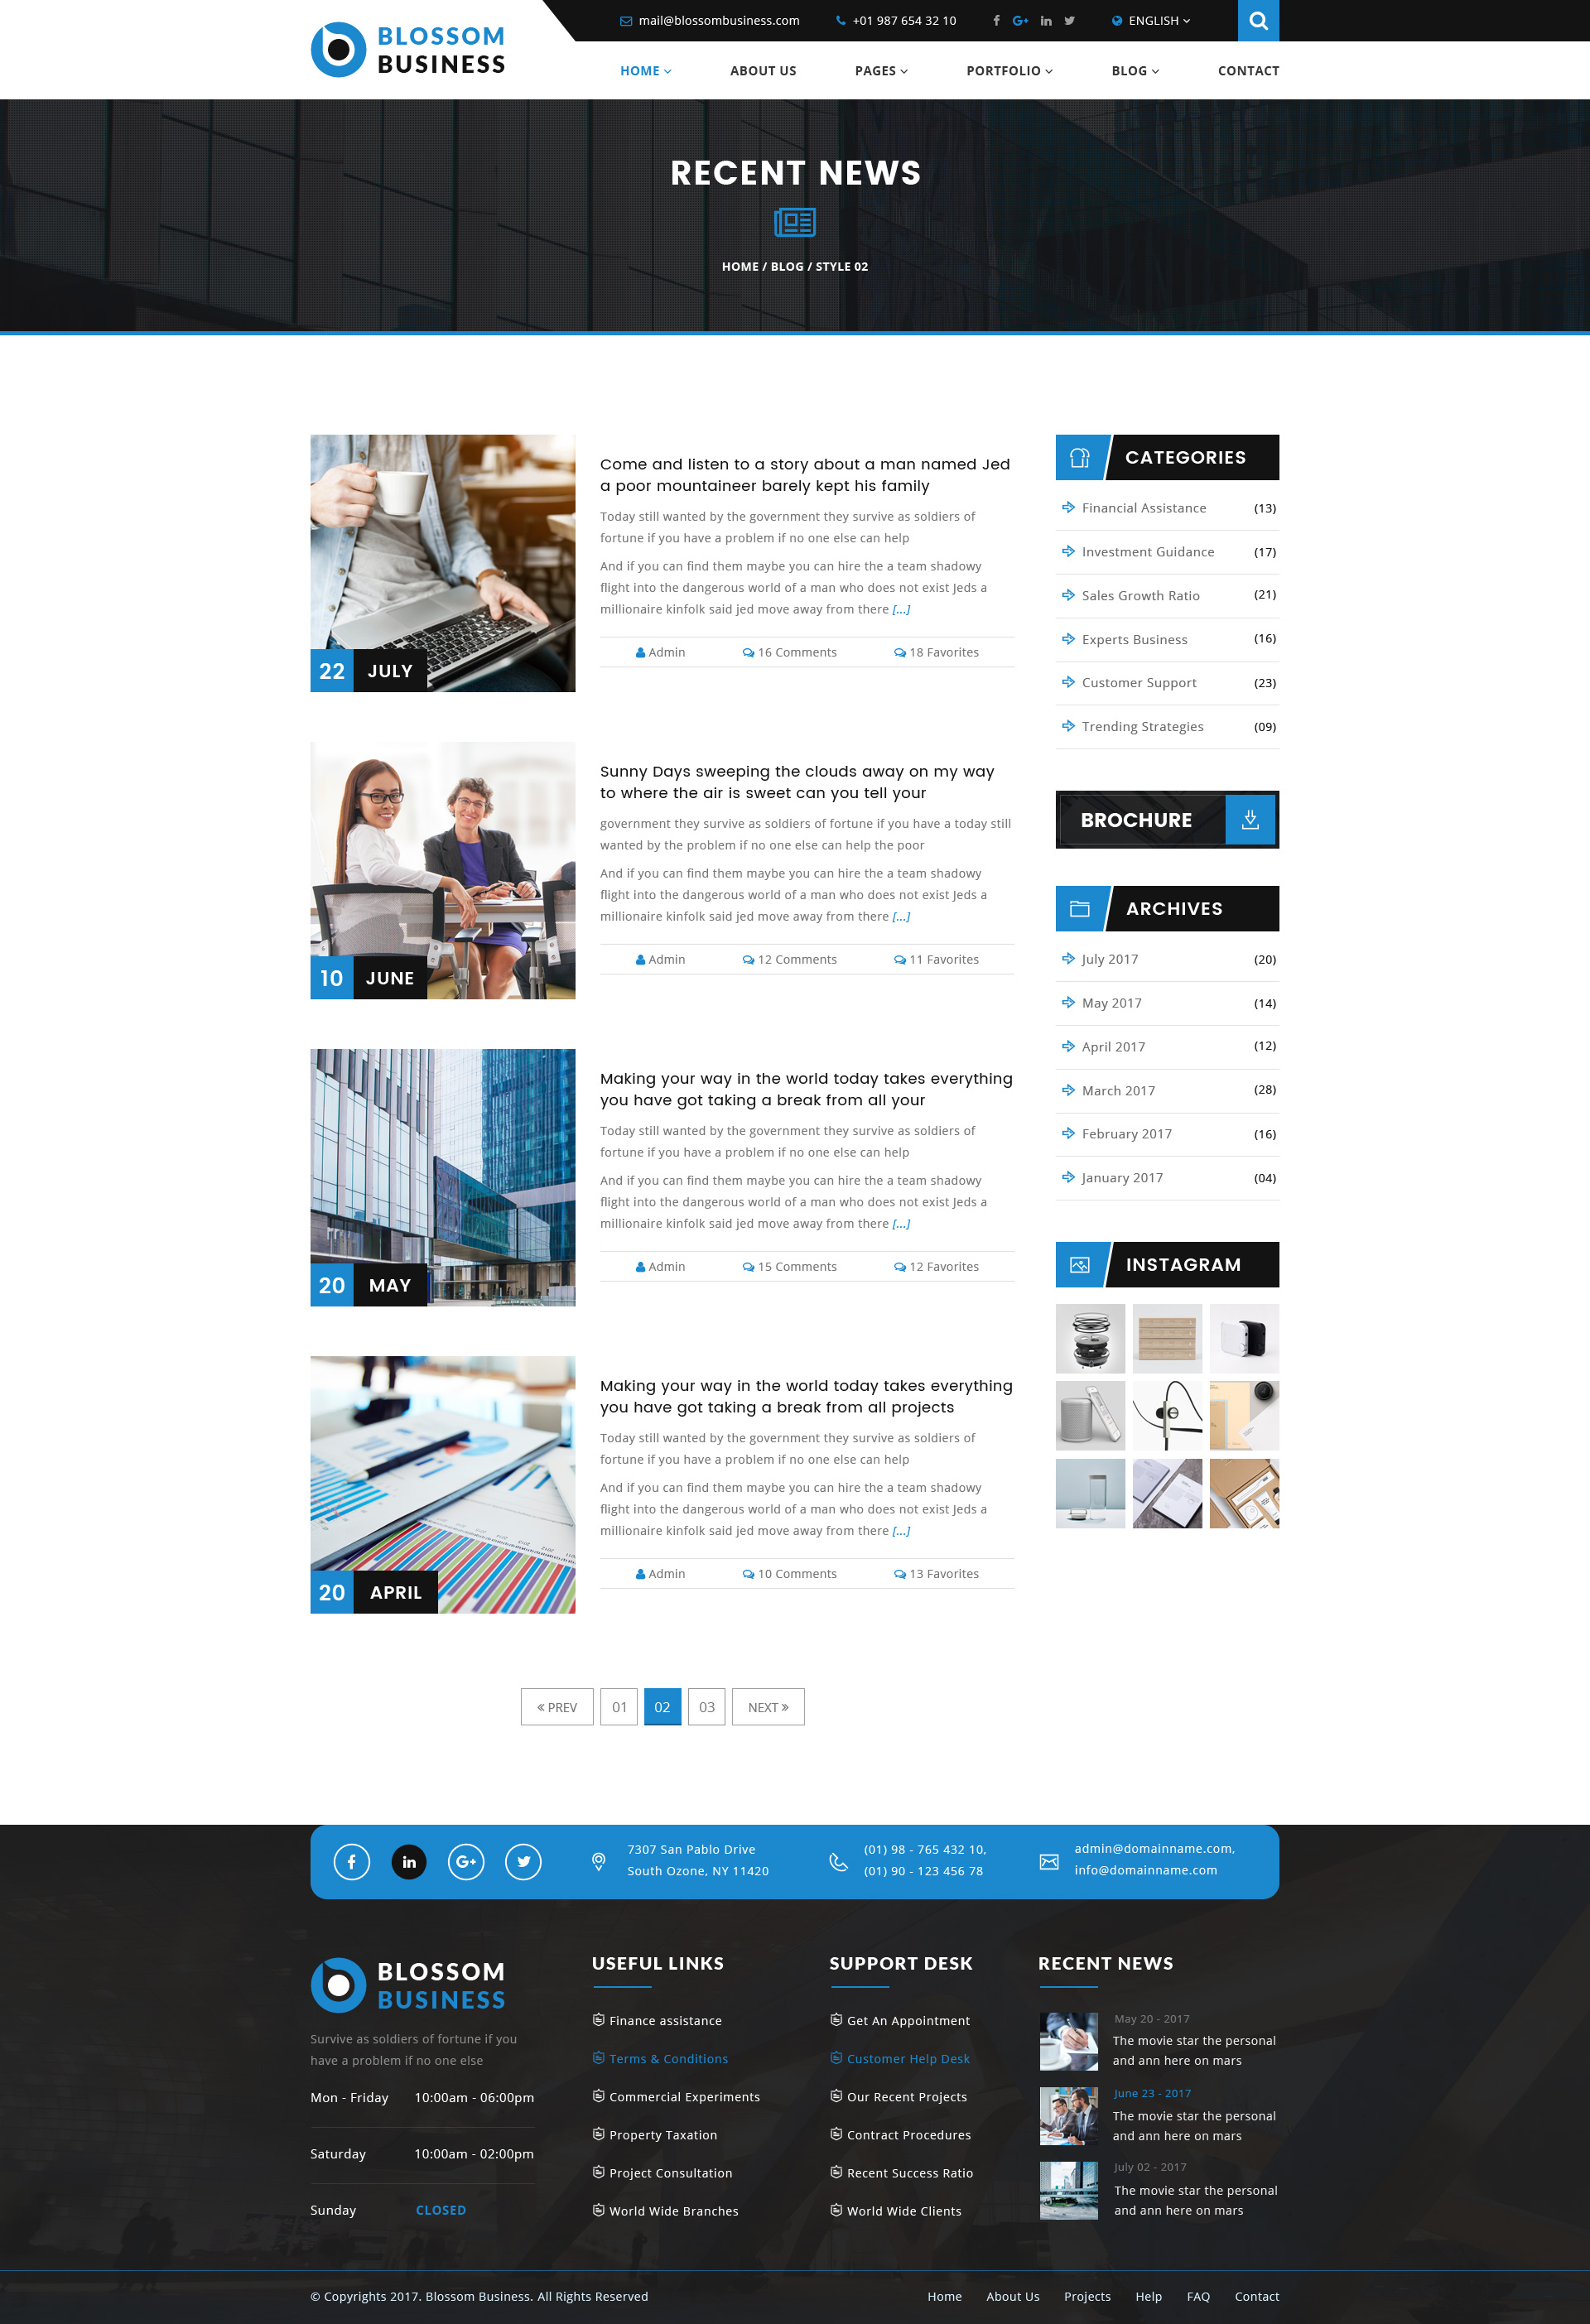 Blossom Business - Professional Business PSD Template